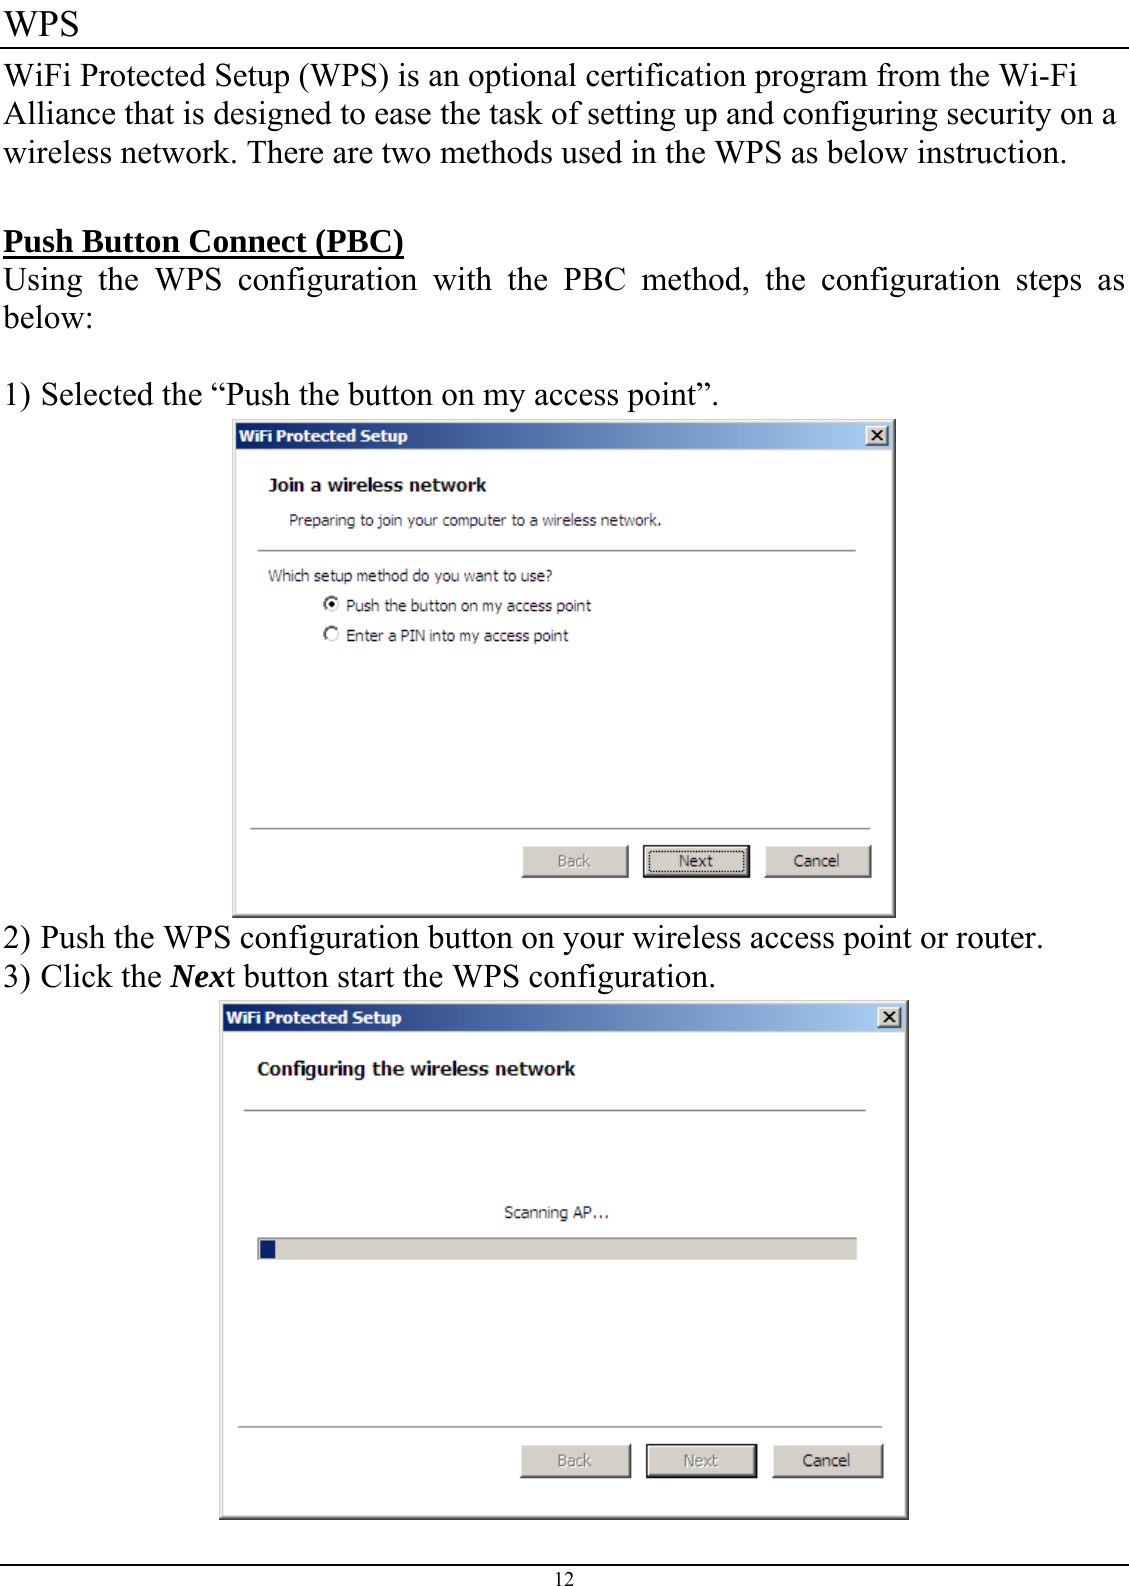  WPS WiFi Protected Setup (WPS) is an optional certification program from the Wi-Fi Alliance that is designed to ease the task of setting up and configuring security on a wireless network. There are two methods used in the WPS as below instruction.  Push Button Connect (PBC) Using the WPS configuration with the PBC method, the configuration steps as below:  1) Selected the “Push the button on my access point”.  2) Push the WPS configuration button on your wireless access point or router. 3) Click the Next button start the WPS configuration.  12 